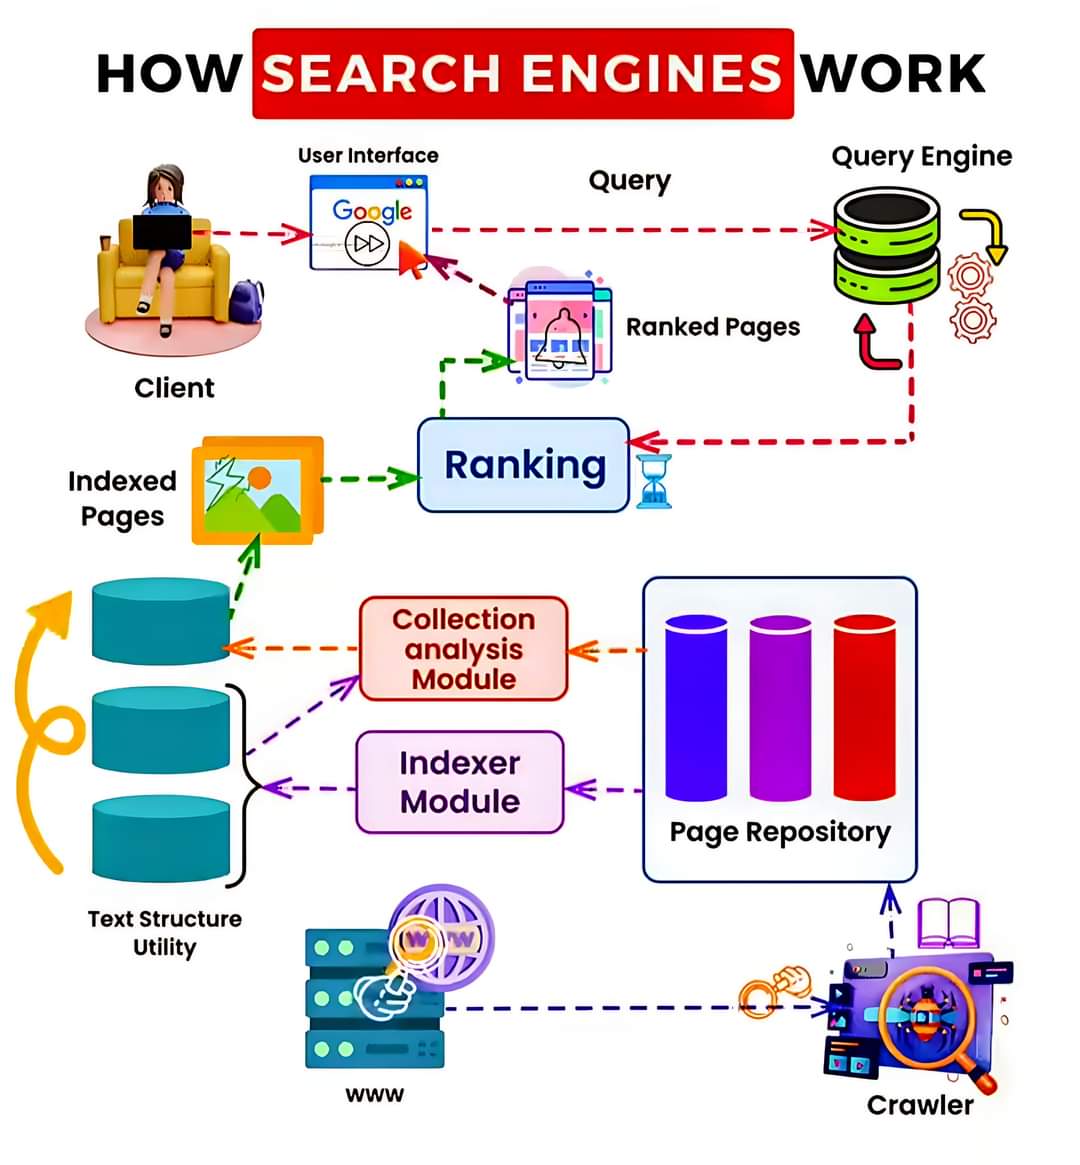 How Search Engines Work?

Advanced SEO Experts Agency 
Your Trusted Partner in Digital Success! 
Advancedseoexperts.com
#advancedseoexperts
#searchengine #searchrankings #searchalgorithm
#searching #googlesearch #searching #rankingfactors  #searchengineoptimization #seo